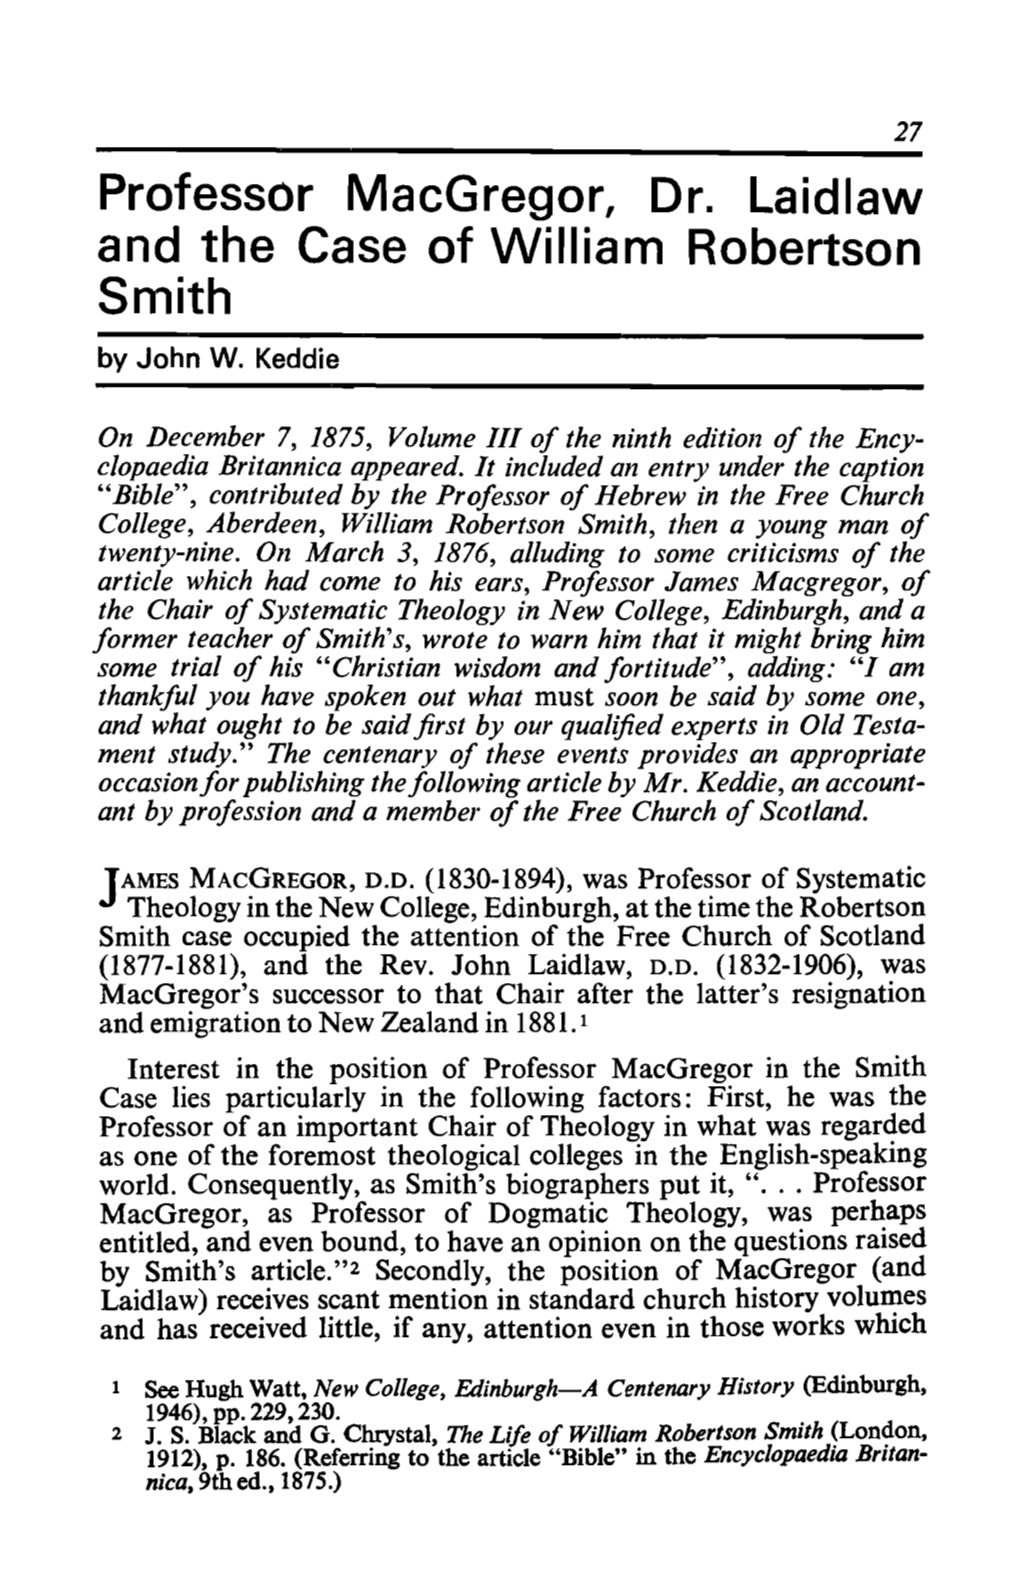 Professor Macgregor, Dr. Laidlaw and the Case of William Robertson Smith by John W